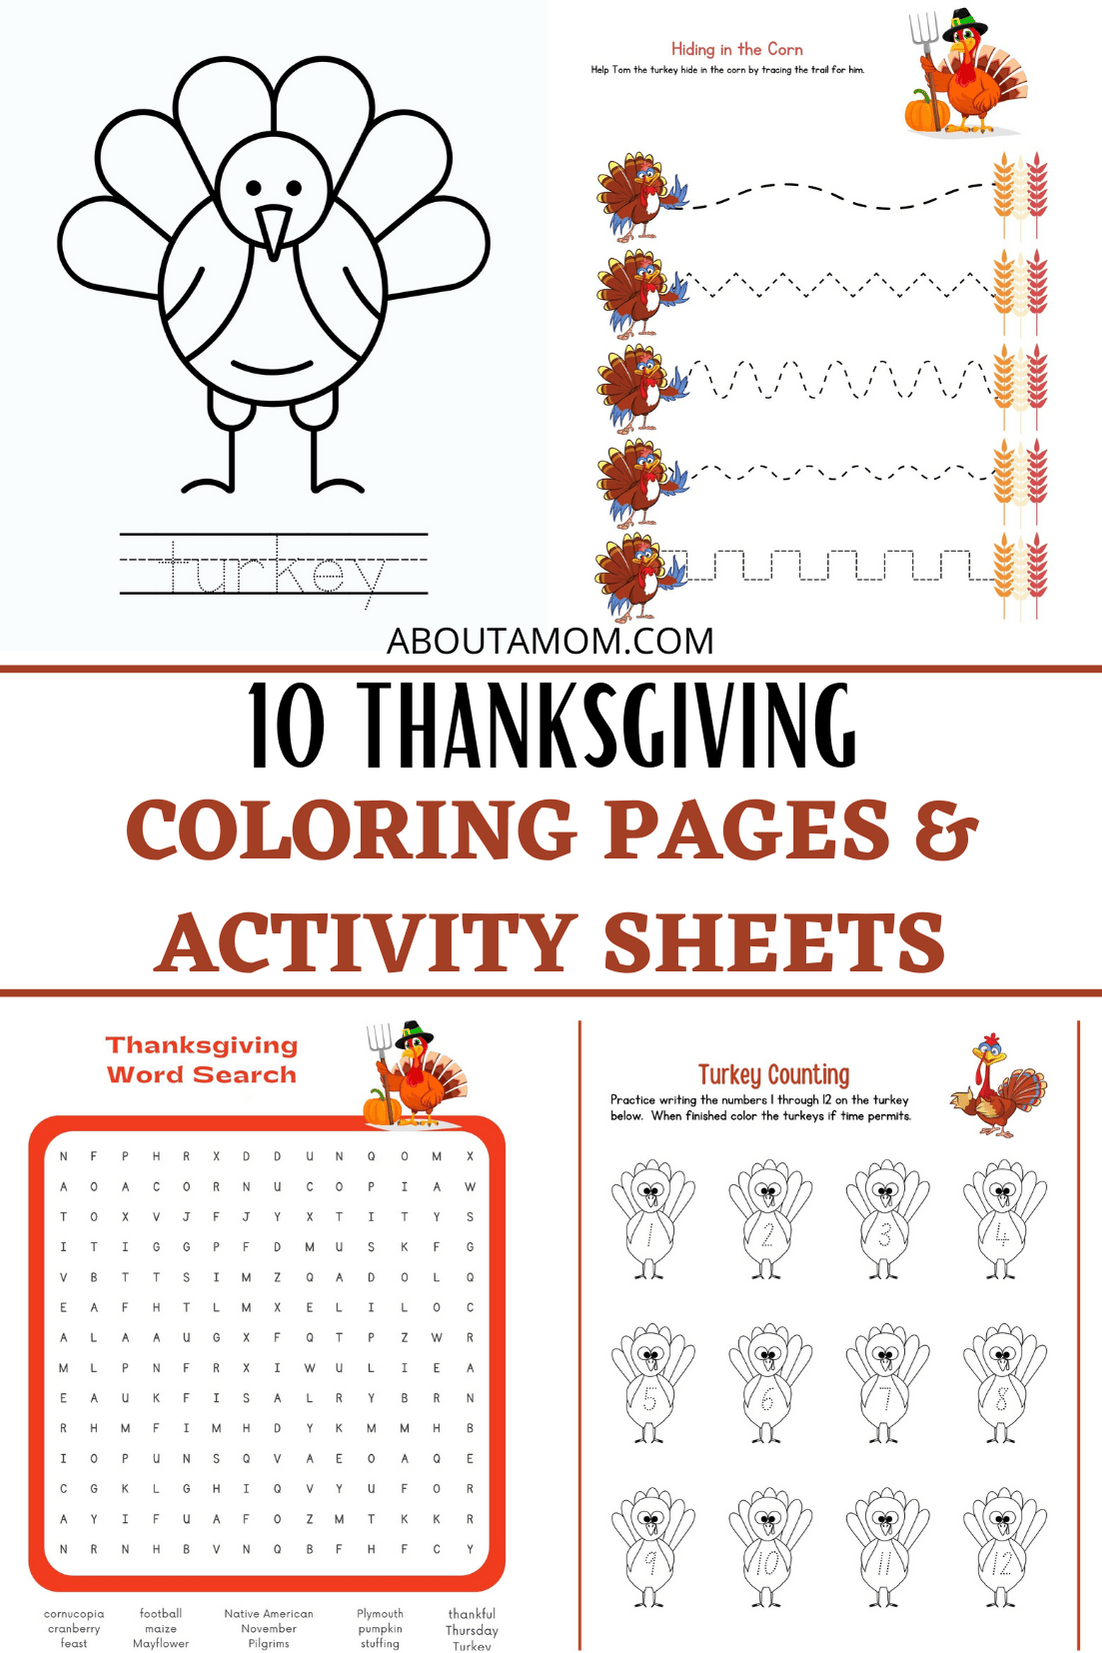 Looking for free Thanksgiving coloring pages and activity sheets that make the kids’ table fun? Here are 10 free printable Thanksgiving coloring pages and activity sheets for kids of all ages.